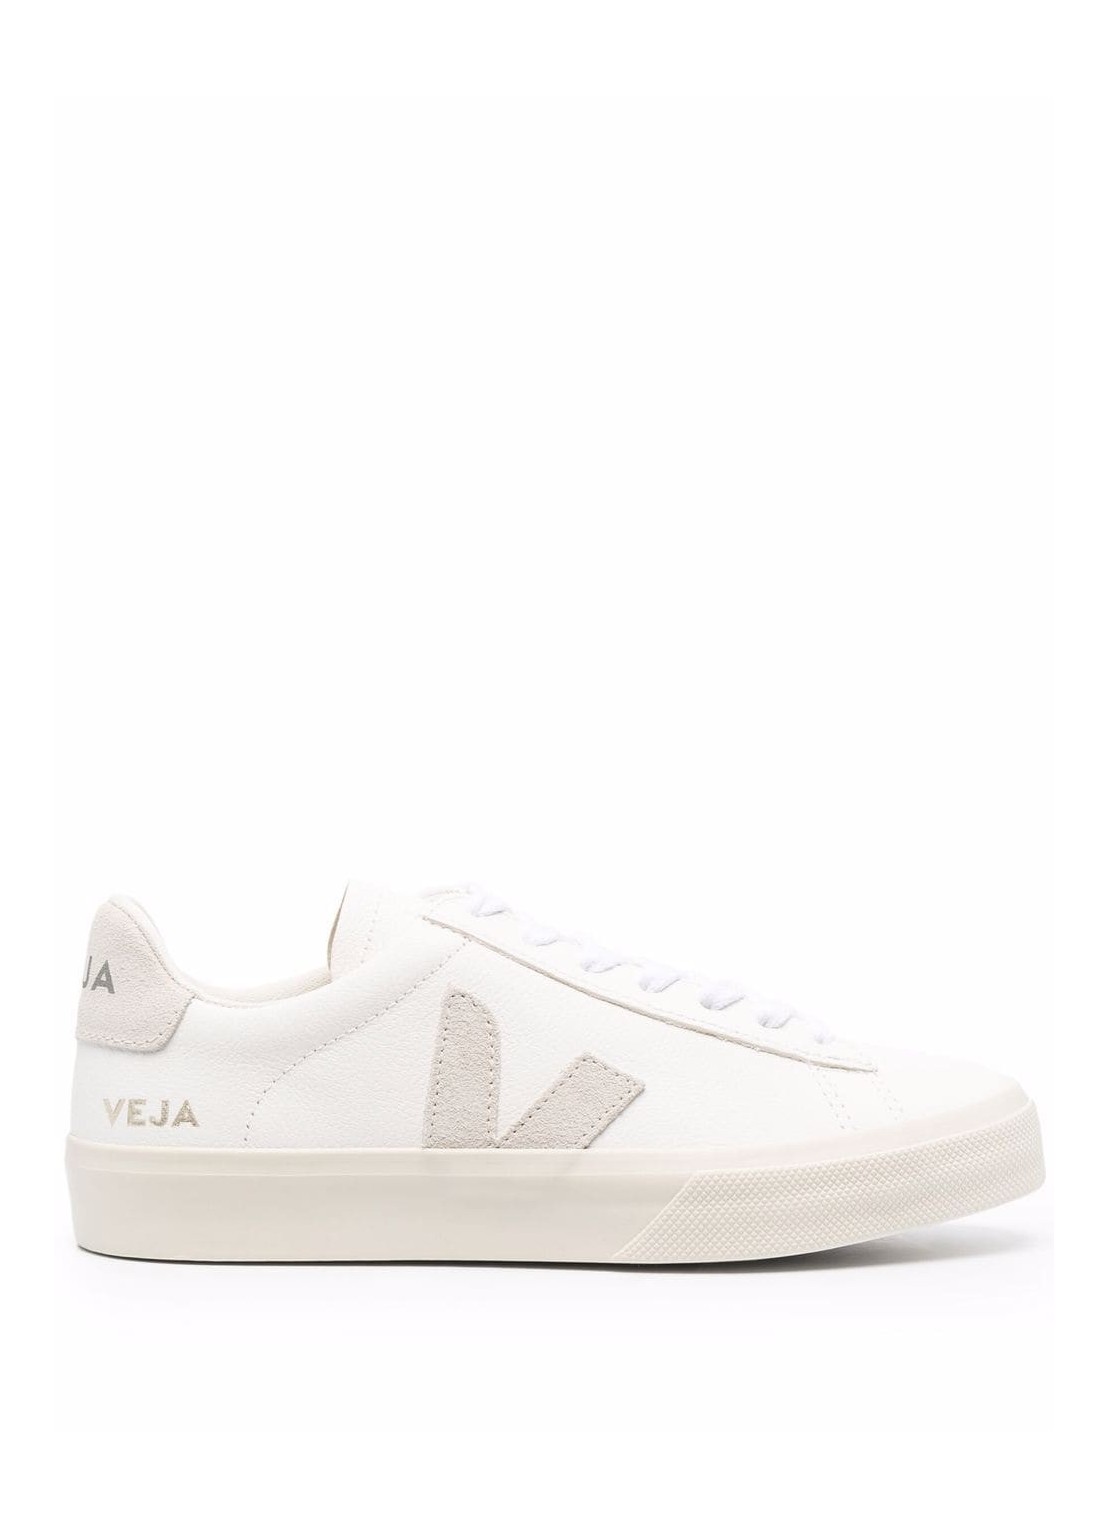 Sneaker veja sneaker man man campo chromefree cp0502429 extra white natural suede talla blanco
 